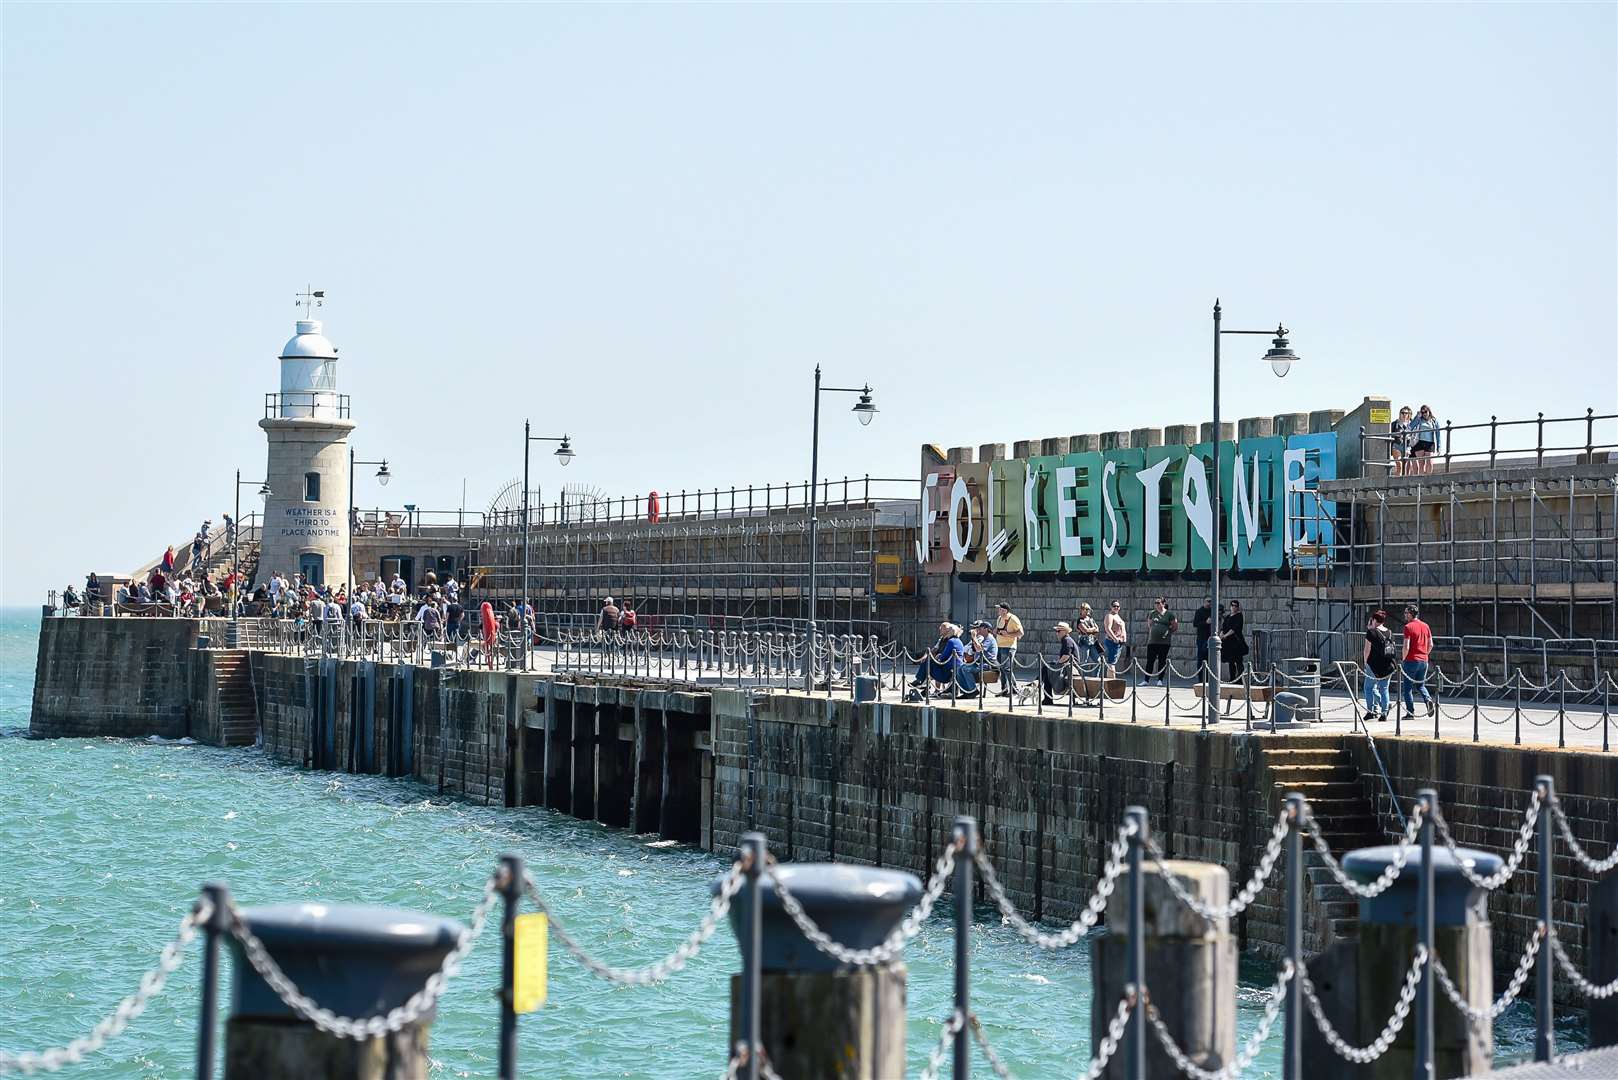 Sir Roger De Haan has sunk millions of pounds into the rejuvenation of Folkestone